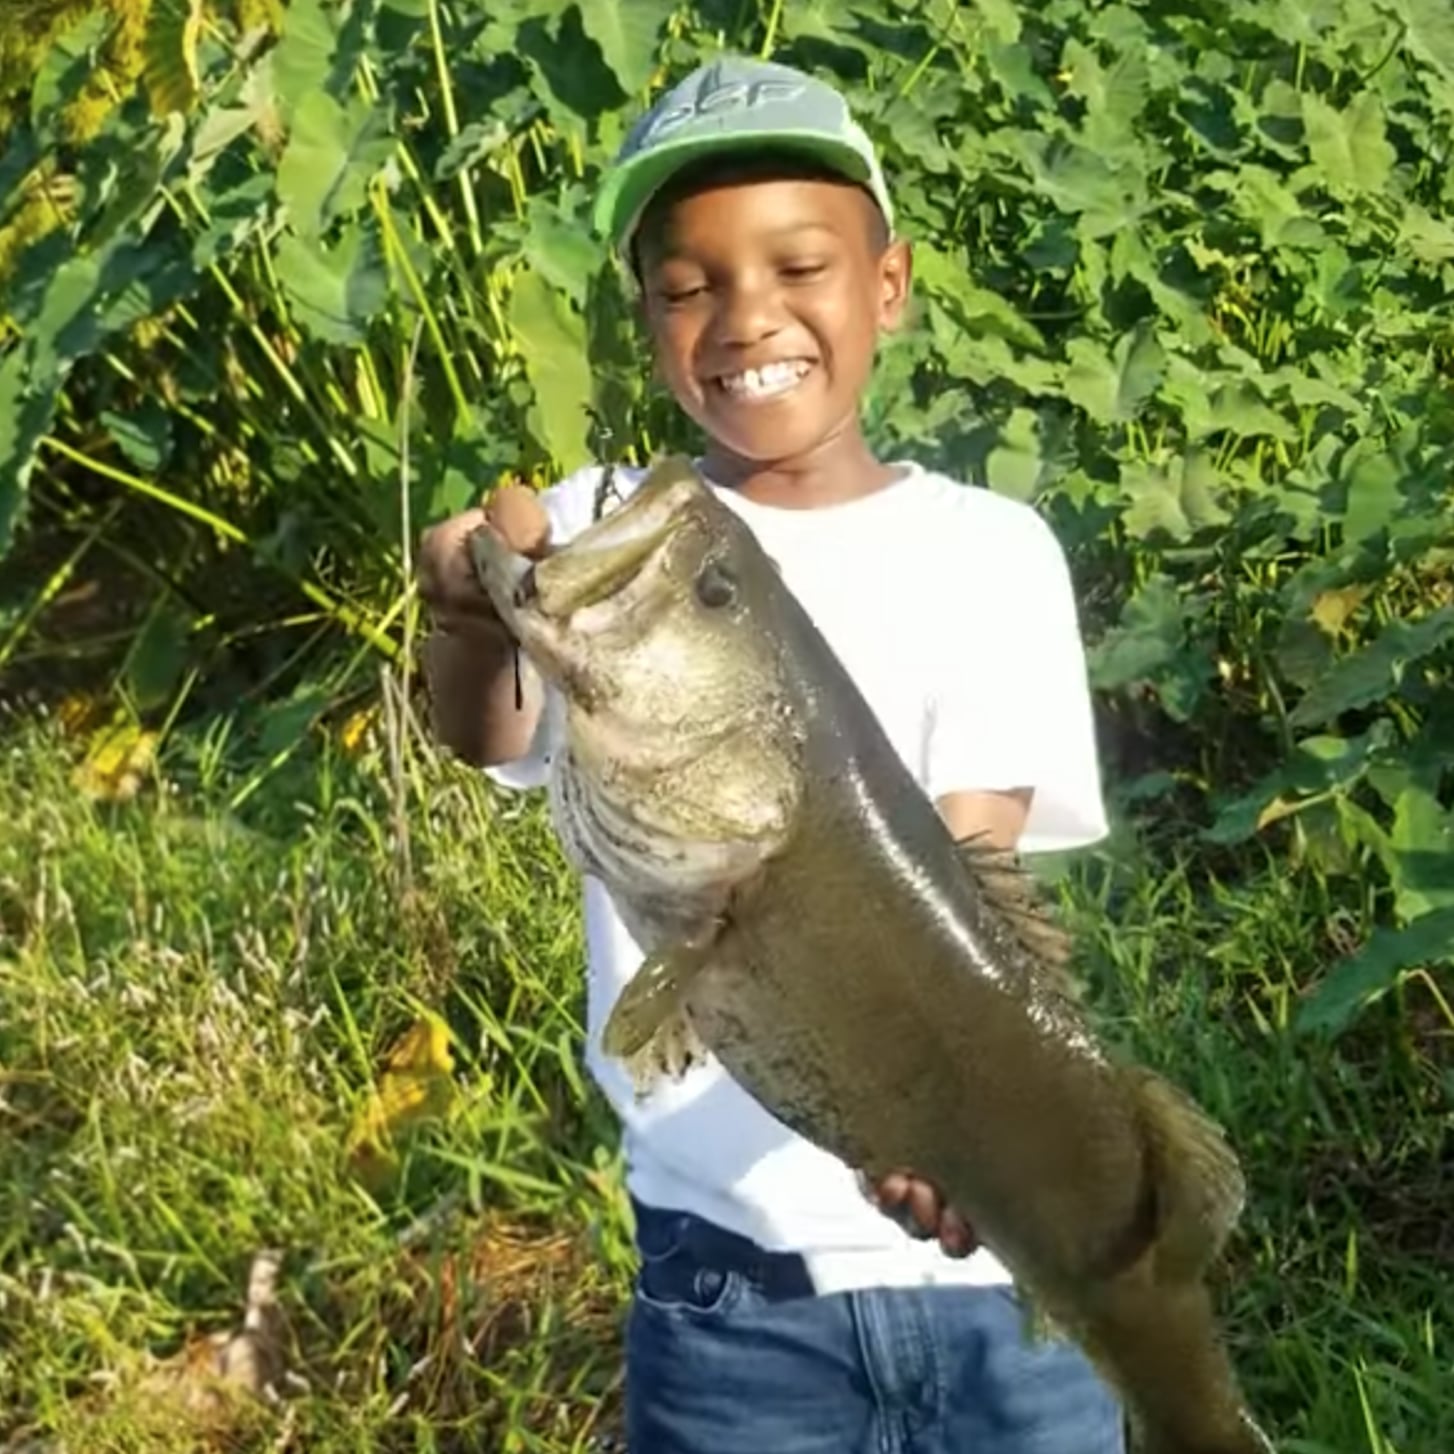 Viral Video of Little Boy Catching and Releasing a Fish